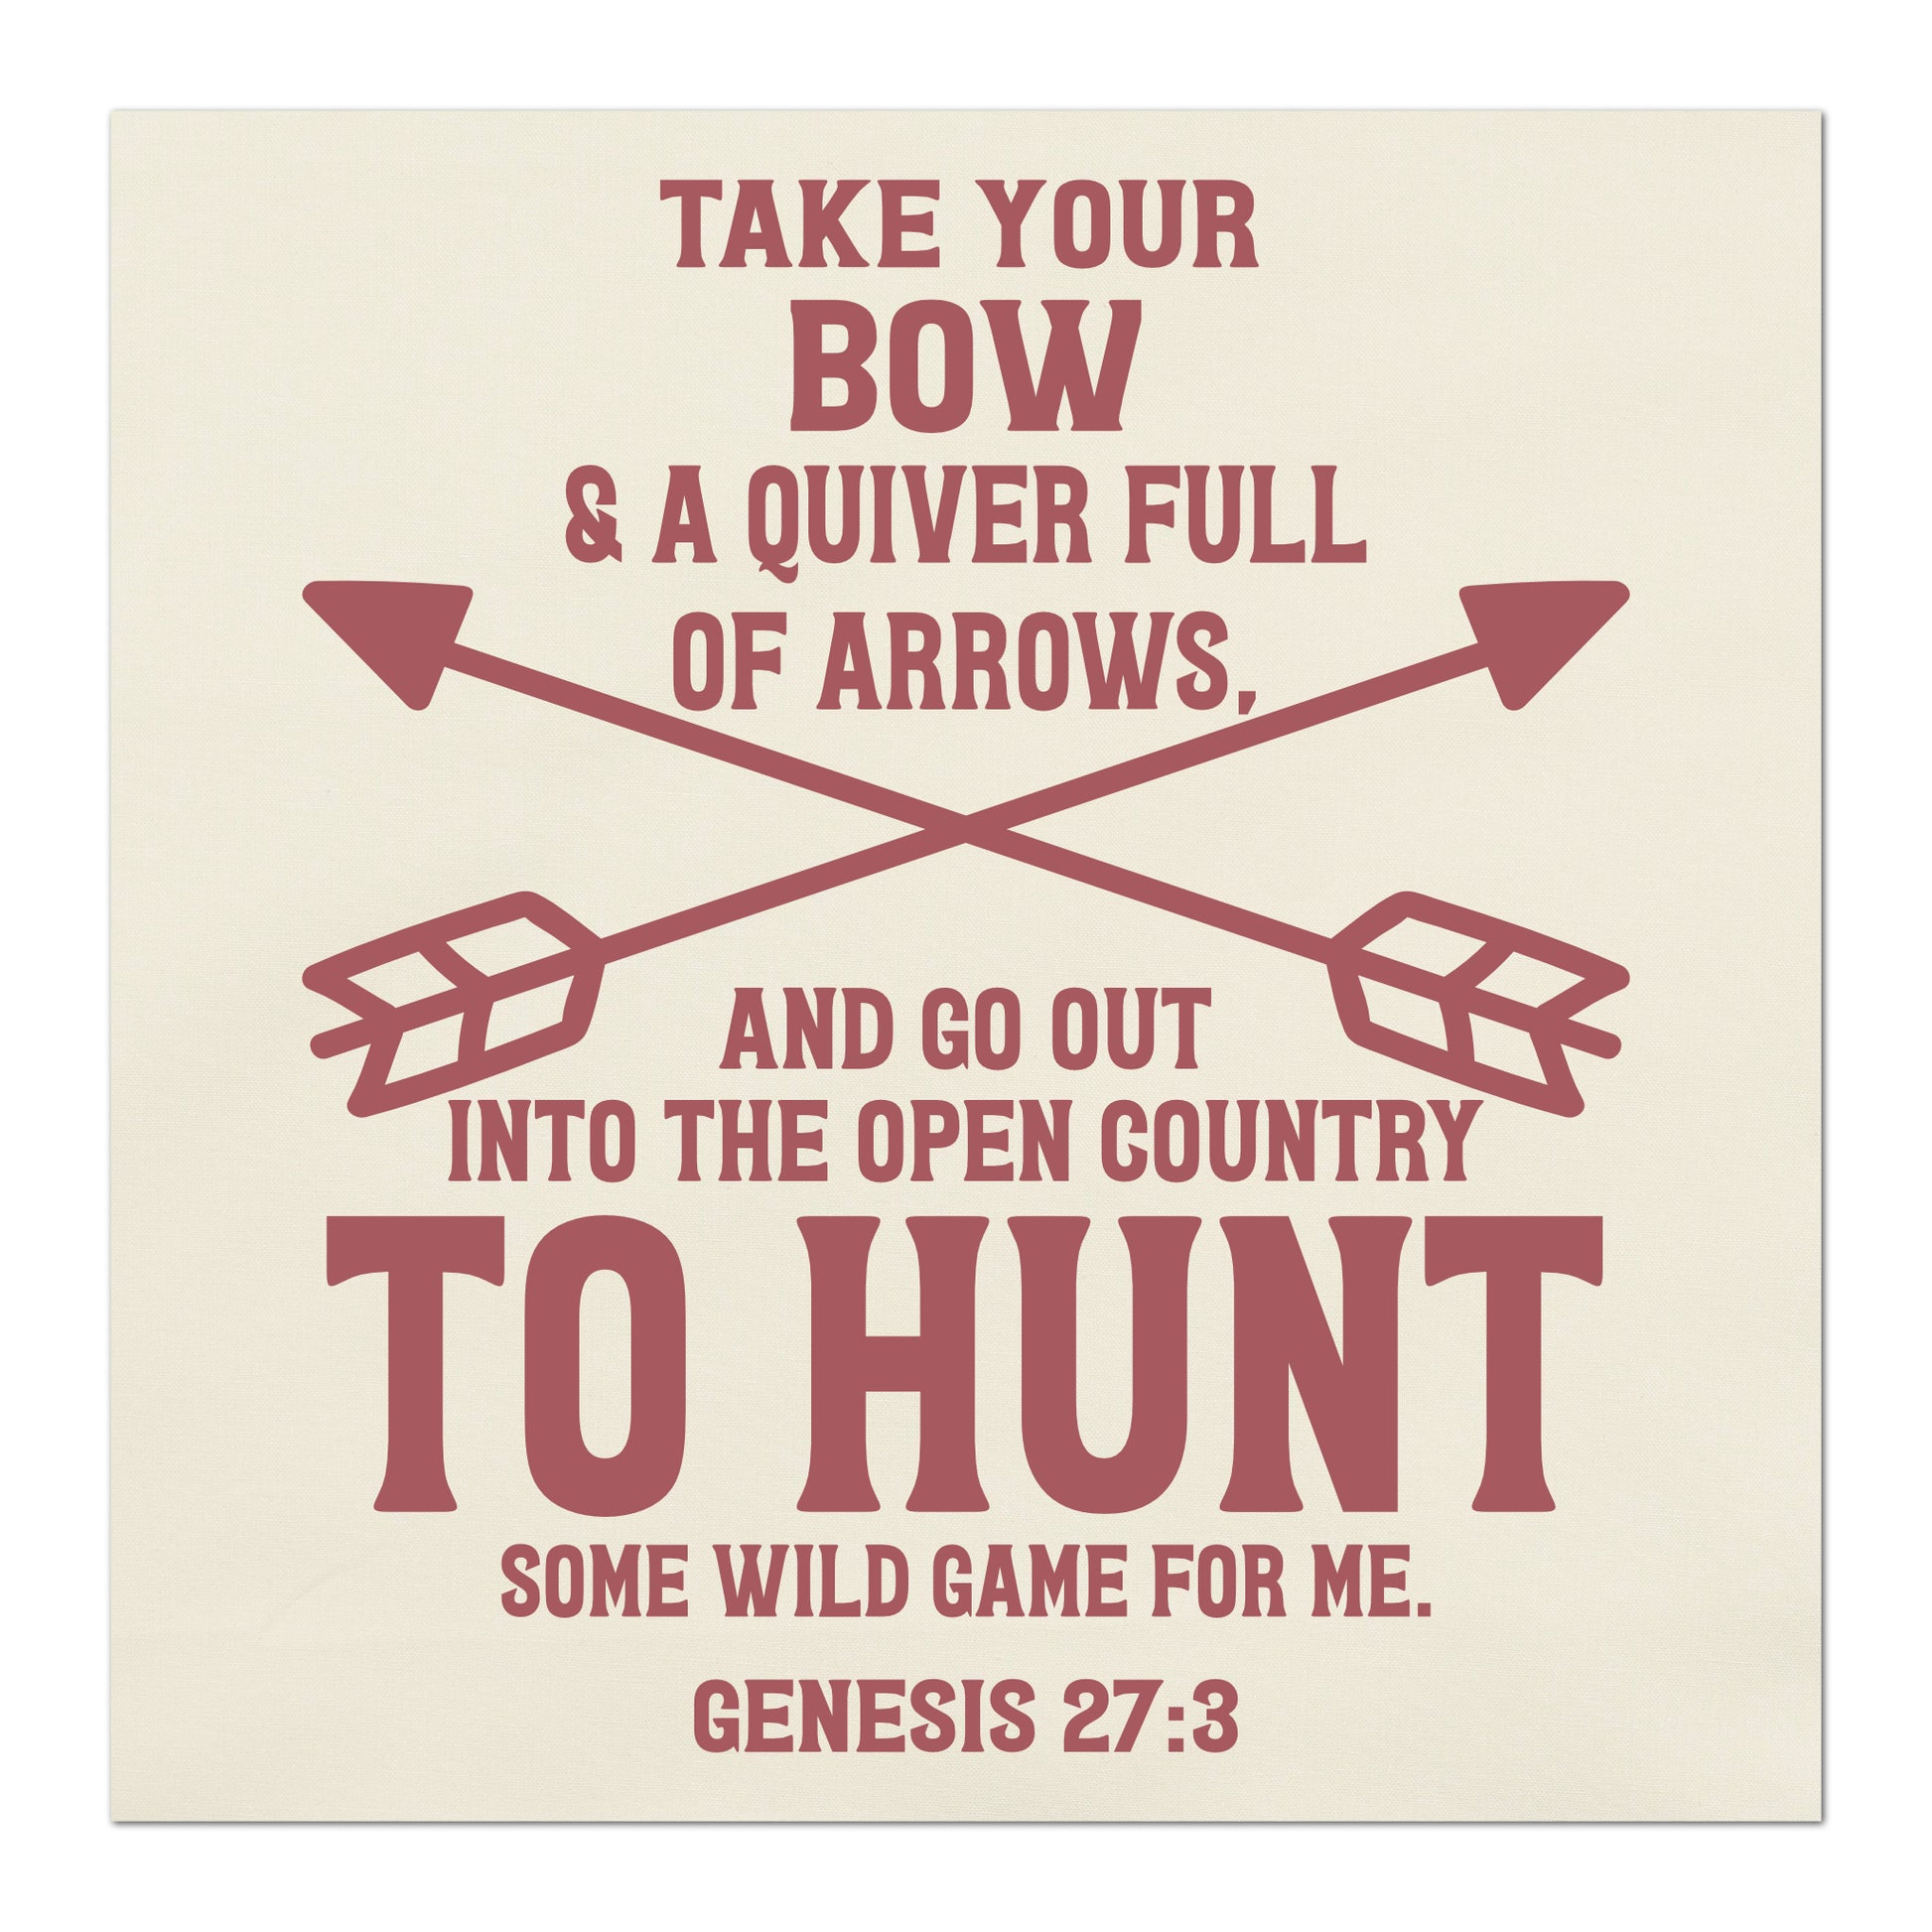 Take you box and a quiver full of arrows and go out into the open country to hunt some wild game for me.  - Genesis 27:3 - Religious Fabric, Scripture Fabric, Hunting Fabric, Wall Art, Quilting, Quilt, Crafting, Quilt Block, Print